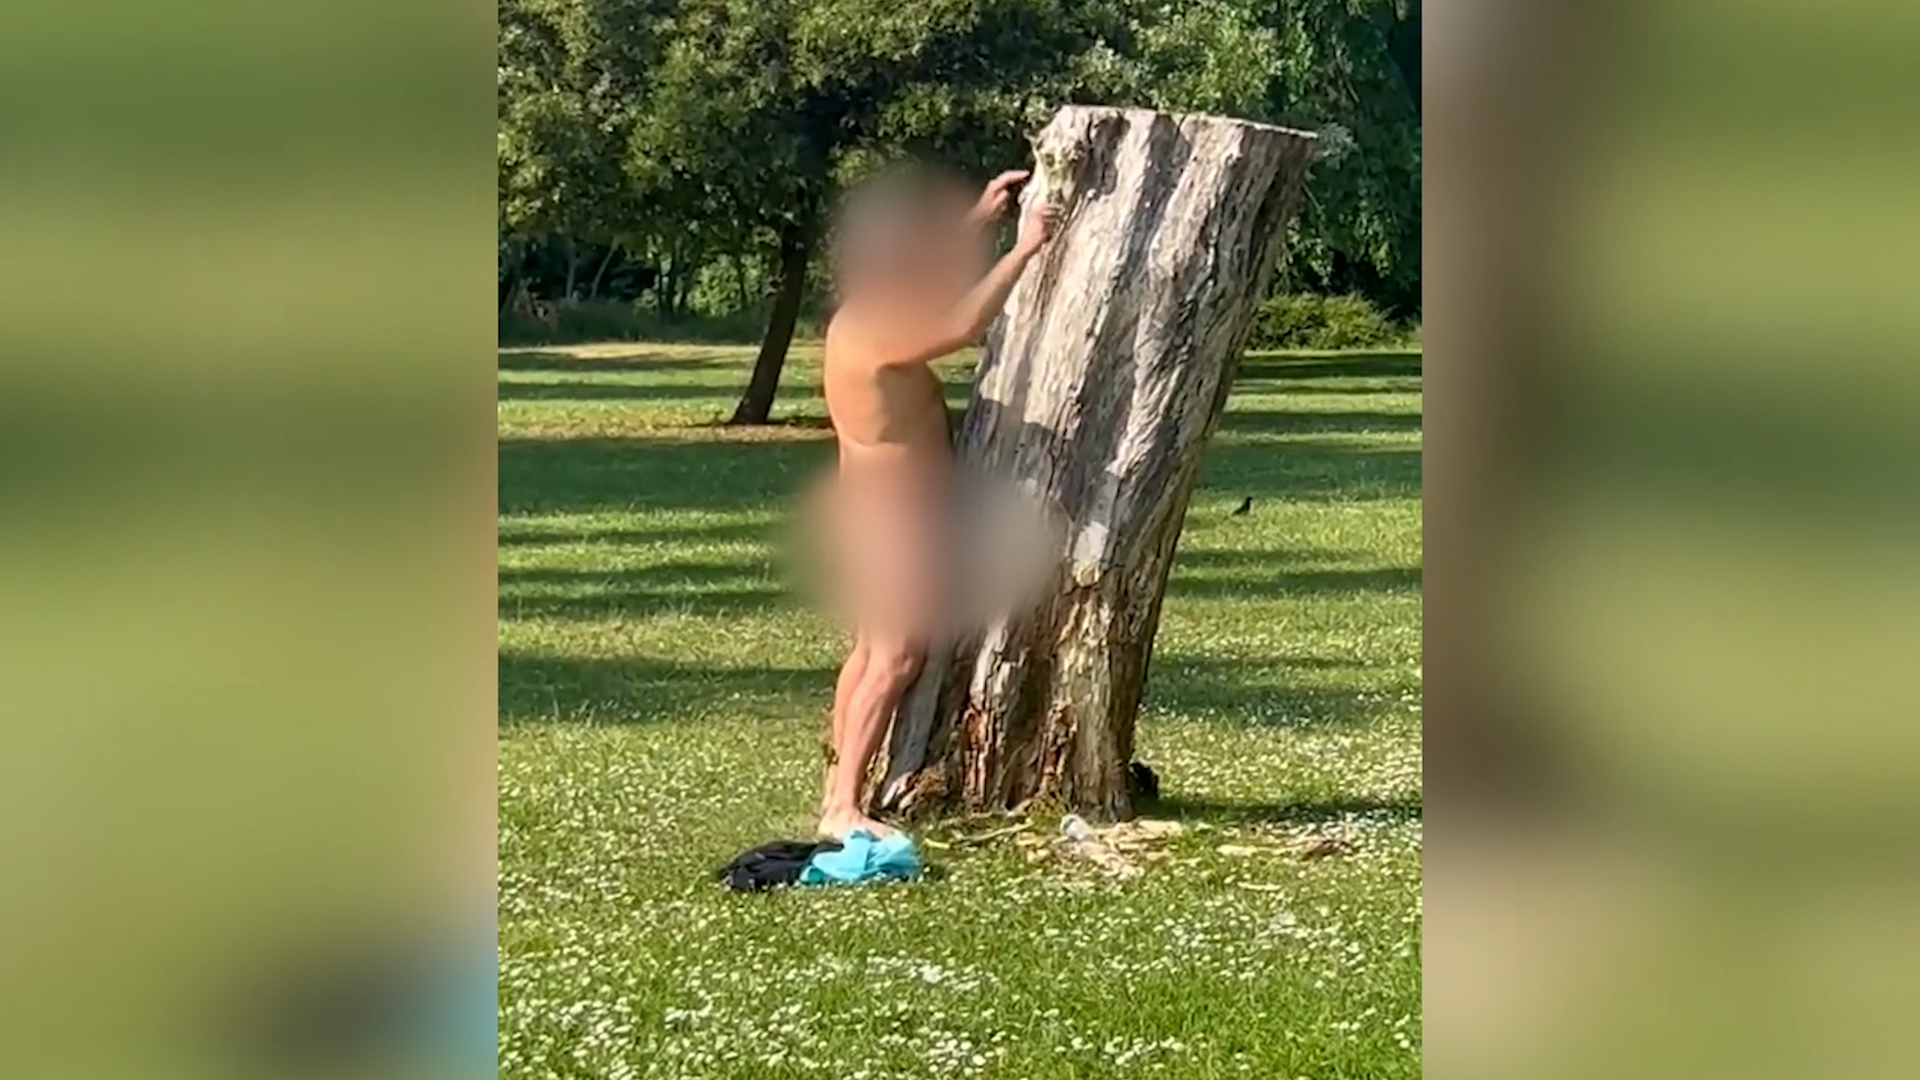 Naked man arrested after allegedly having sex with a tree